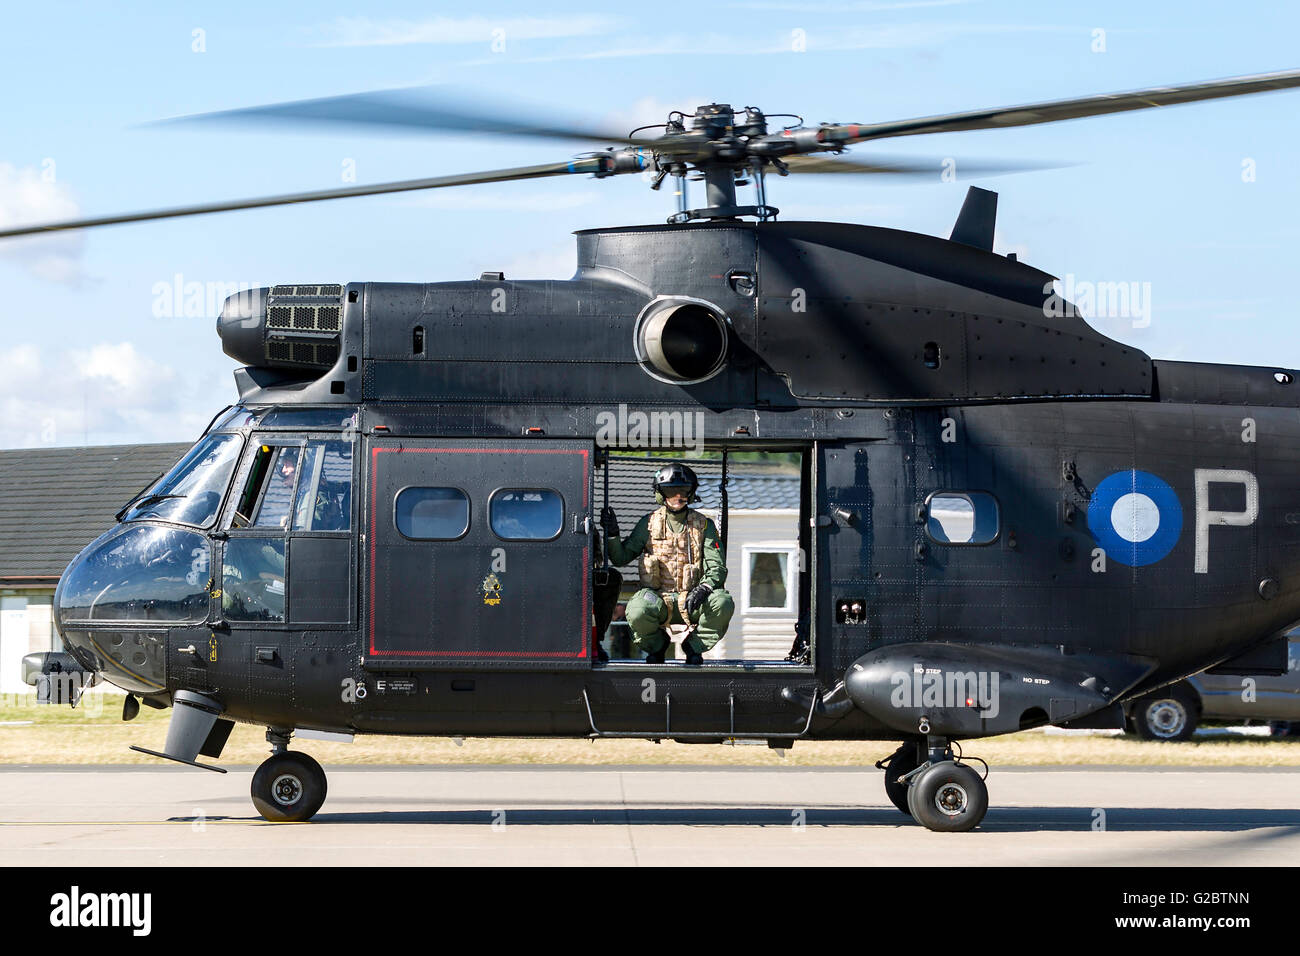 Royal Air Force (RAF) Aerospatiale (Eurocopter) SA-330E Puma HC.2  Helicopter from 230 Squadron based at RAF Benson Stock Photo - Alamy